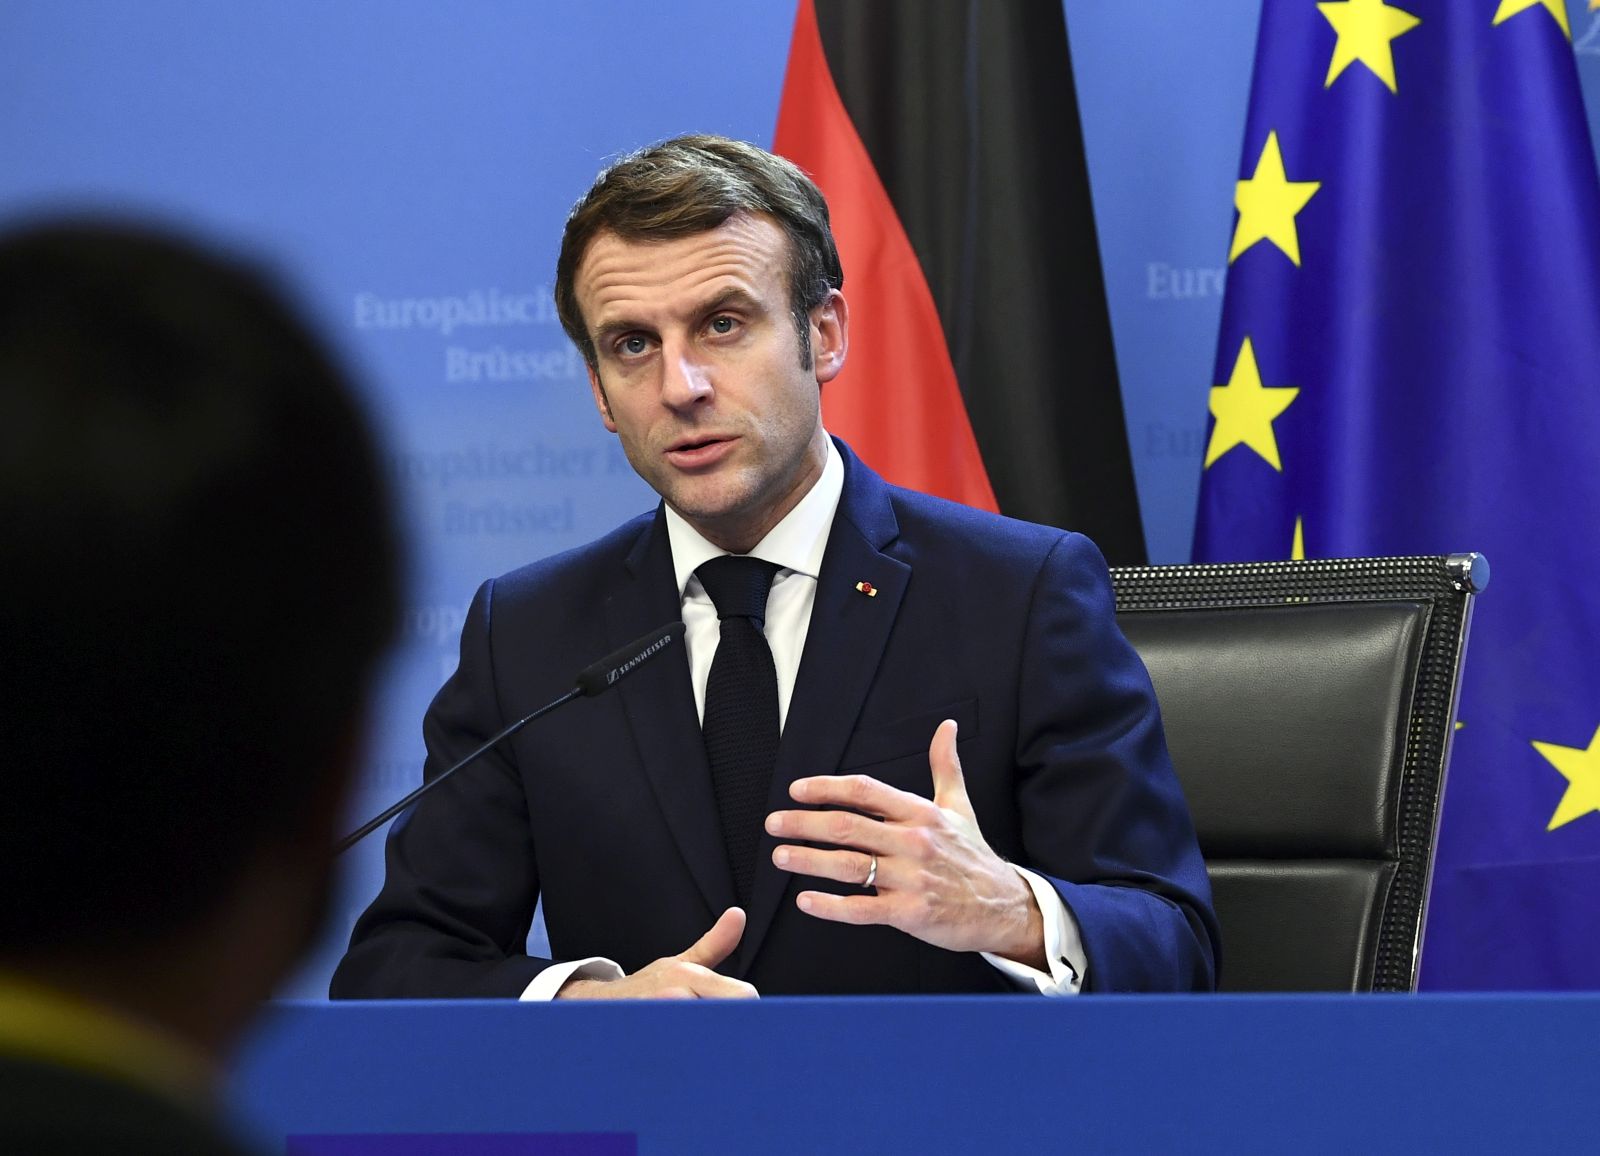 epa09645879 France's President Emmanuel Macron speaks during a joint press conference with Germany's Chancellor Olaf Scholz (out of frame) during an European Union (EU) summit at the European Council Building at the EU headquarters in Brussels, Belgium, 17 December 2021.  EPA/JOHN THYS / POOL